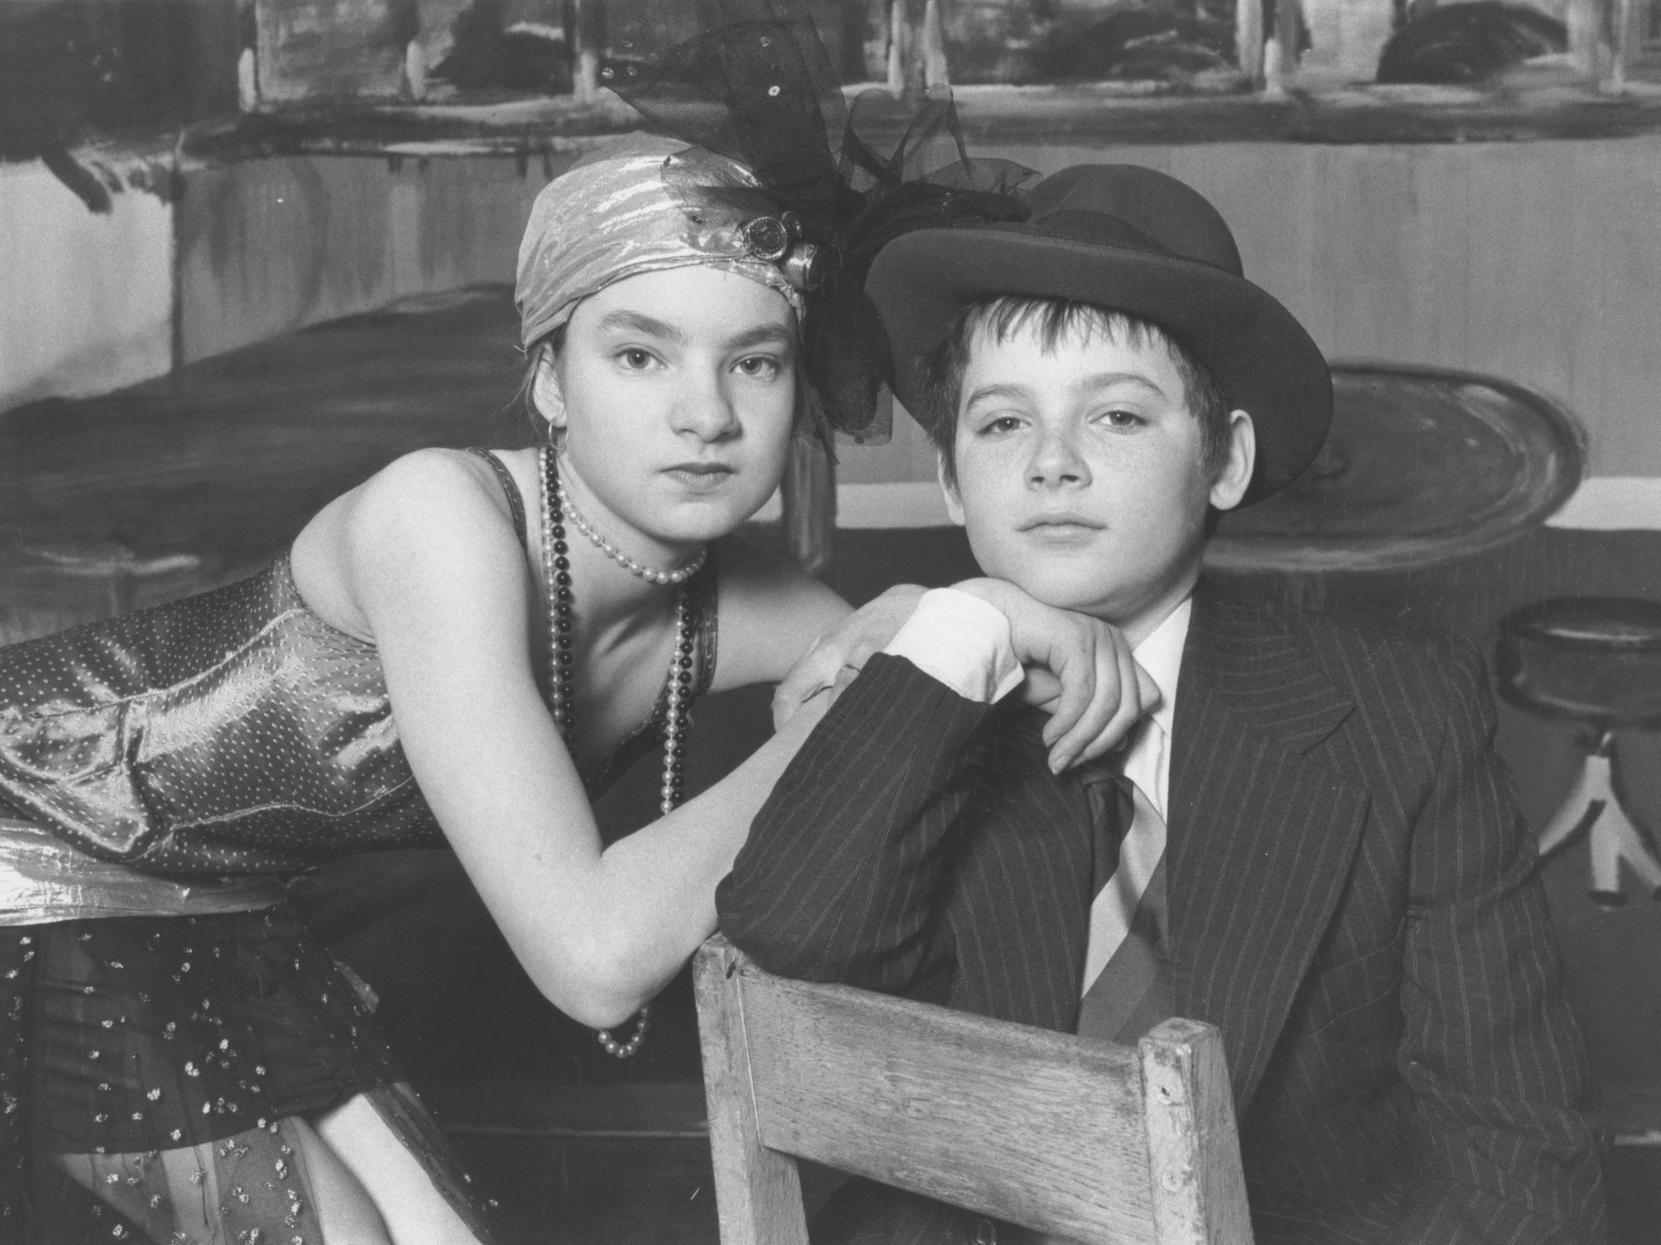 Pictured are the prinicipal characters from the Filey School production of Bugsy Malone, Lee Dawson as Bugsy and Rebecca Cooper as Blousey. Photo taken in March 1994.